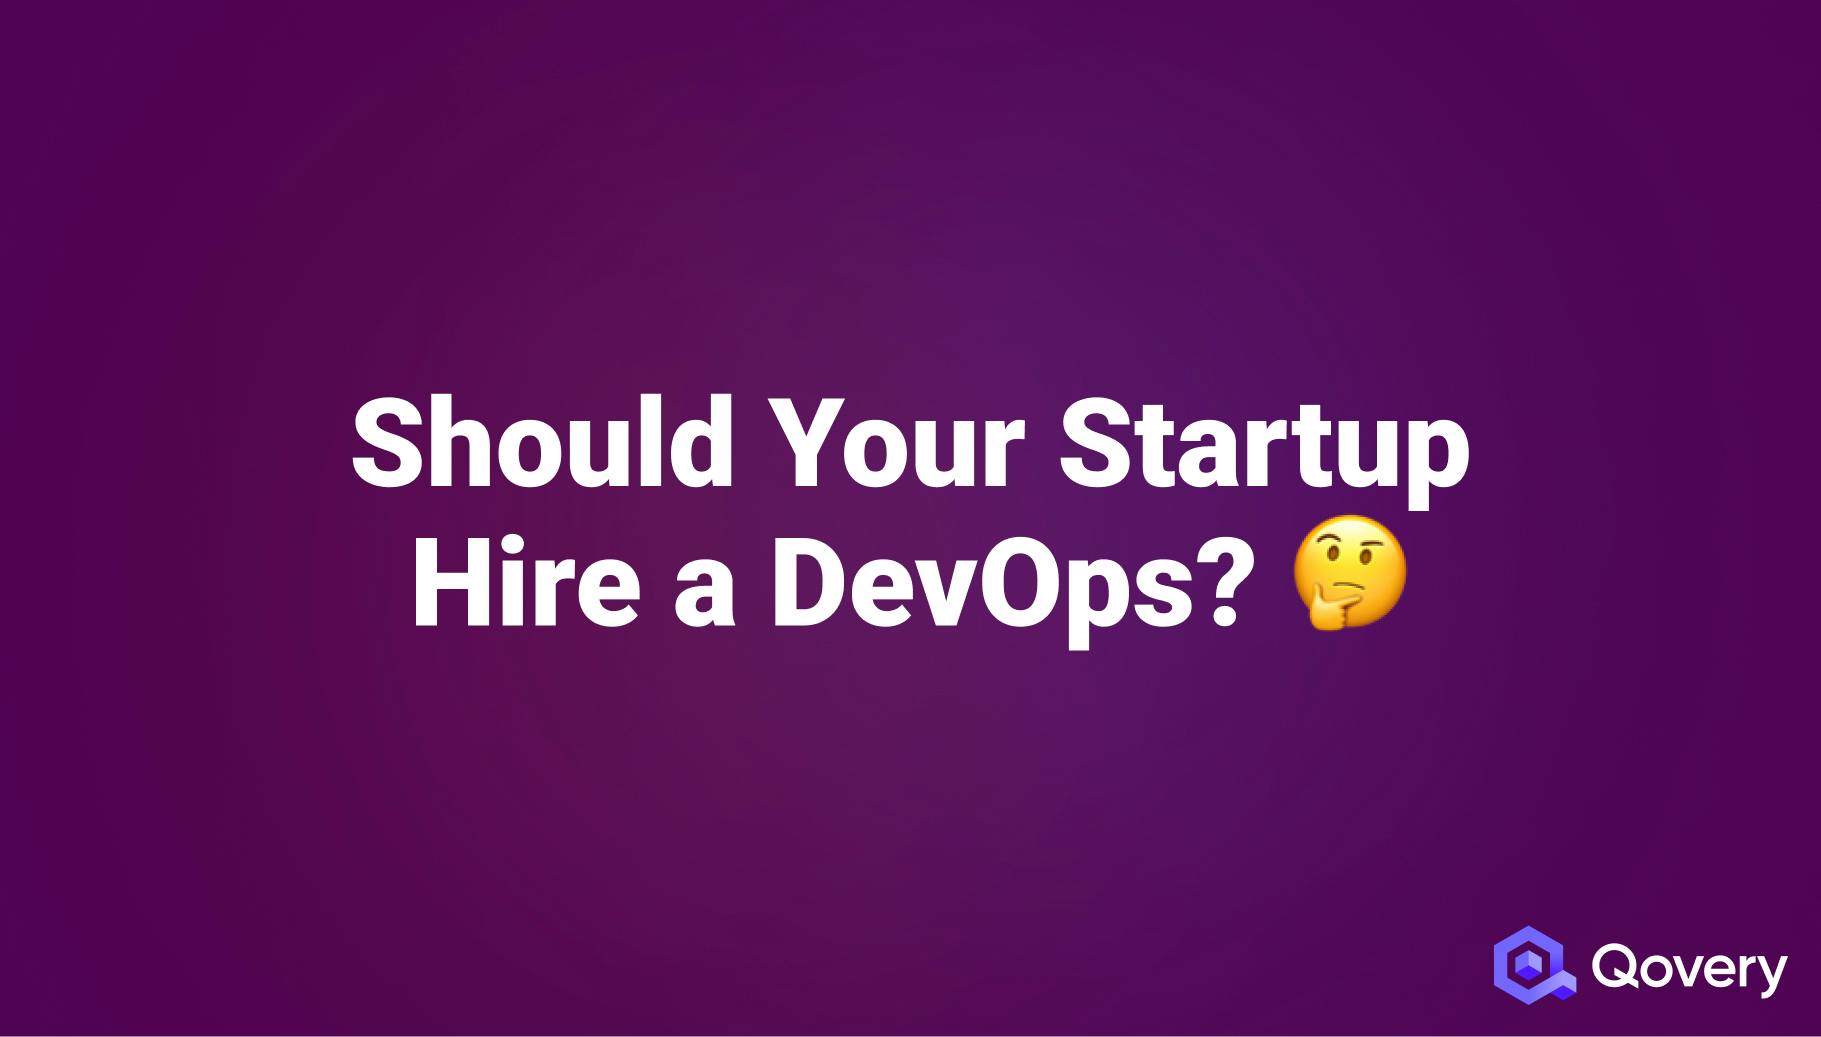 Should Your Startup Hire a DevOps? - Qovery